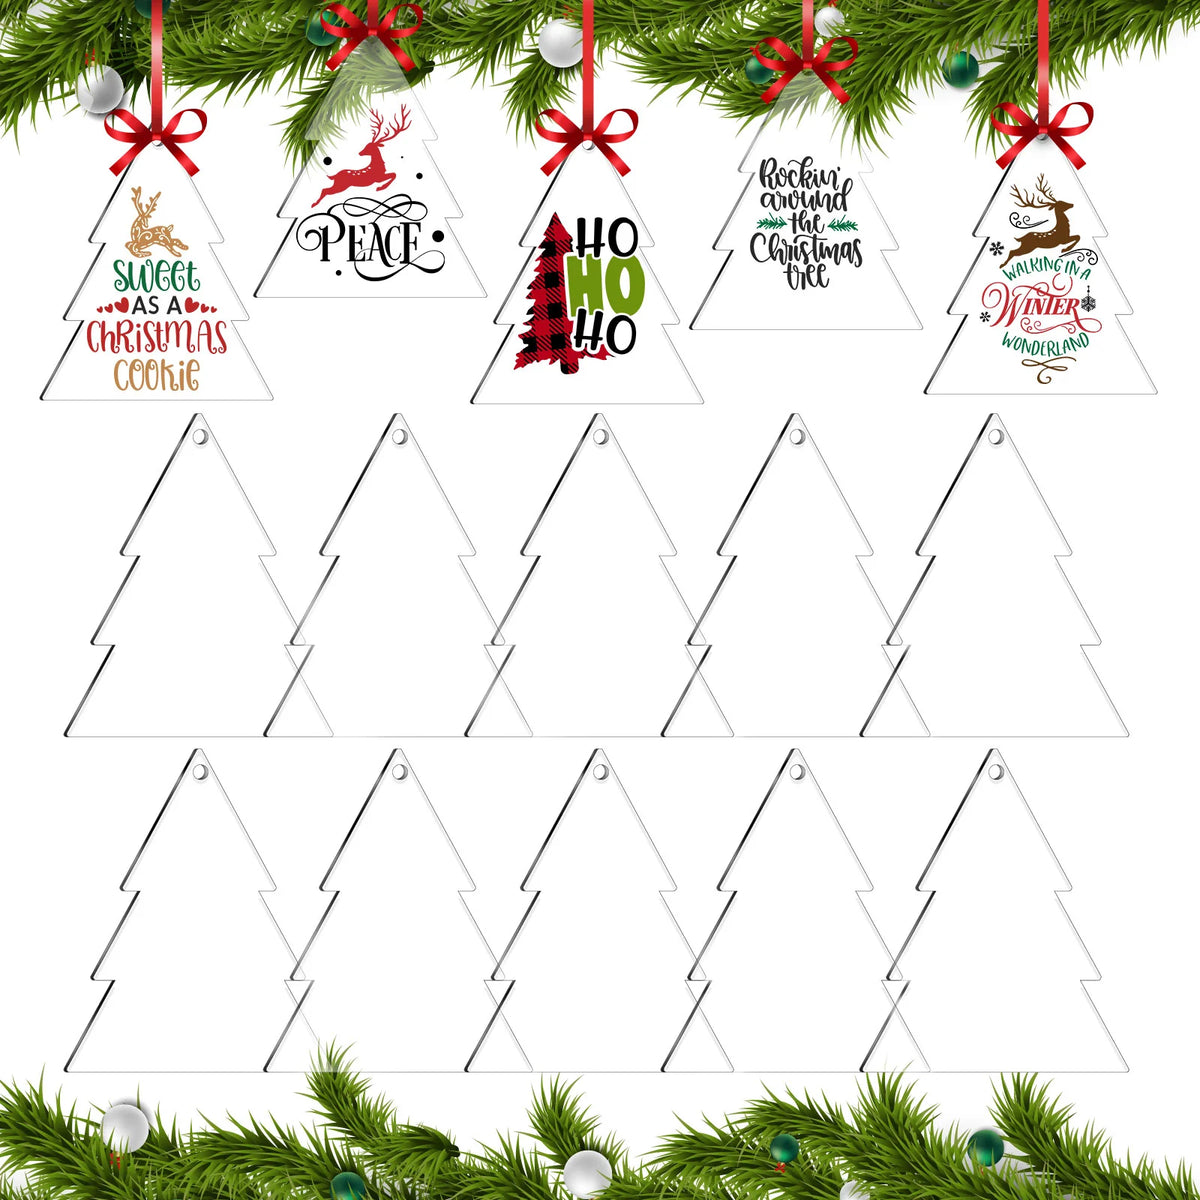 Acrylic Ornaments - 10 Pack